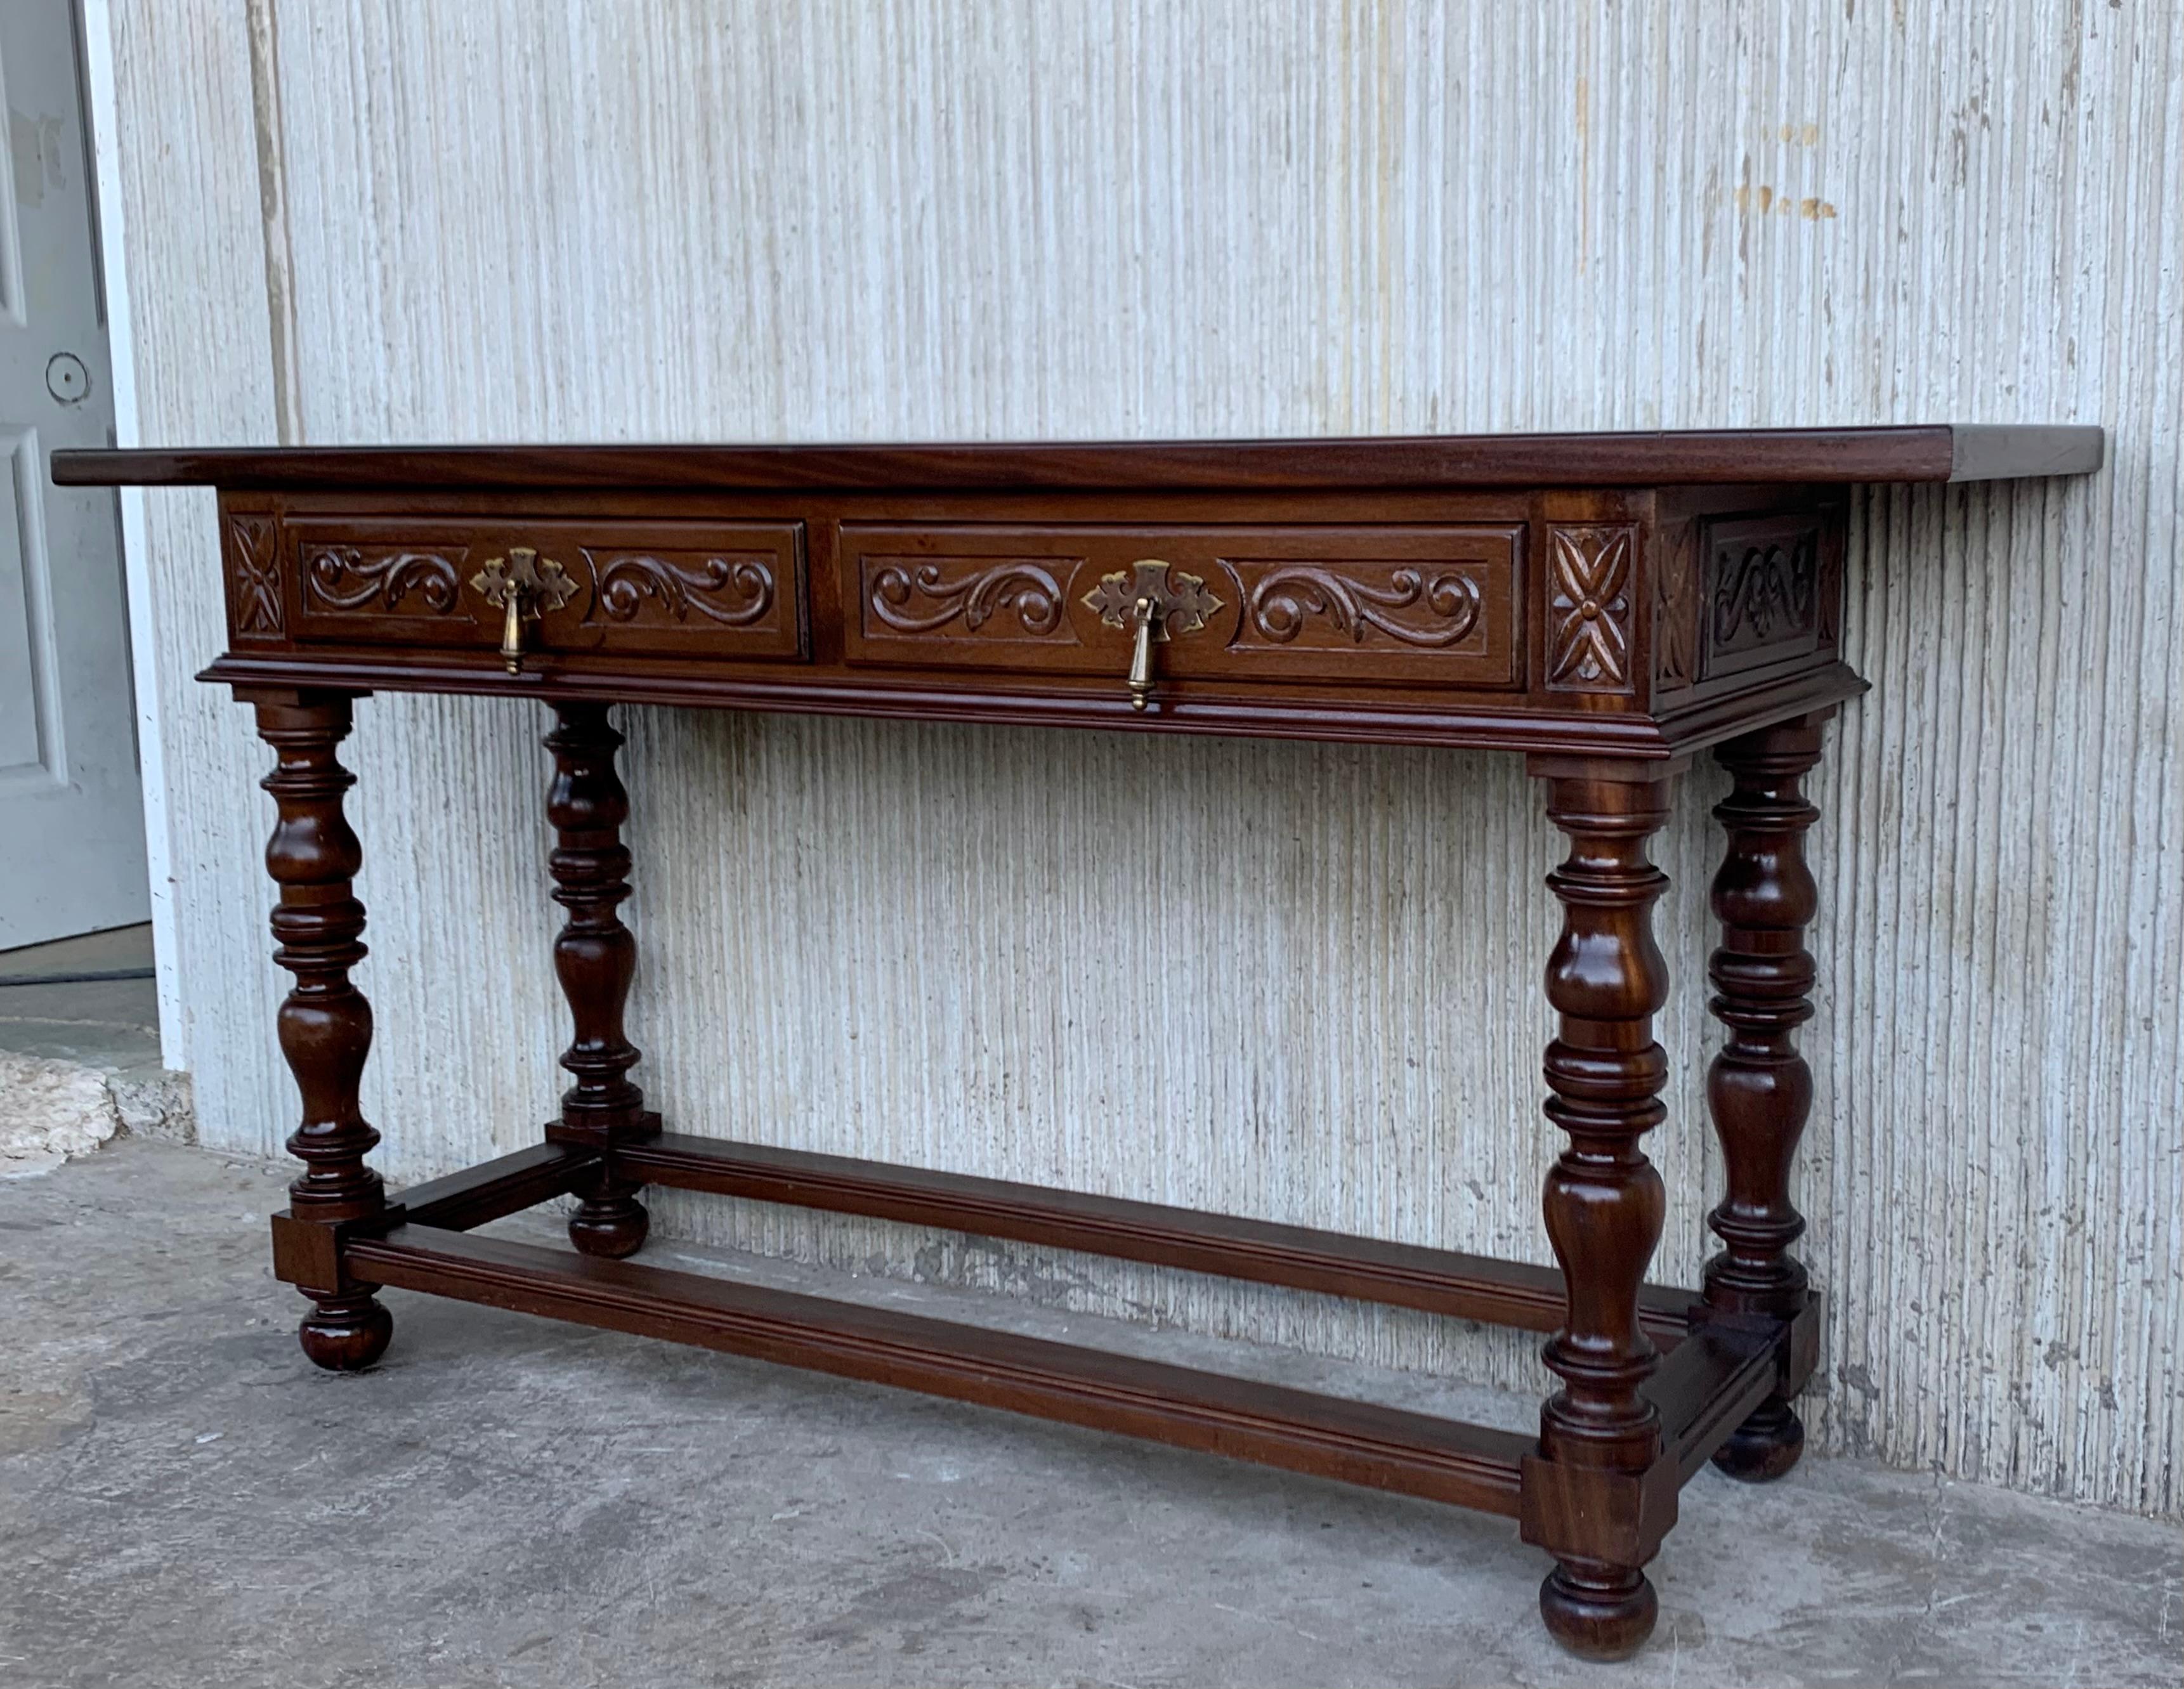 20th Century Spanish Tuscan console table with two drawers and turned legs. It is characteristic of Spanish Baroque furniture with a thick single piece top, simple bold chip carved ornament and bold turnings. It has a rich lustrous patina.

The